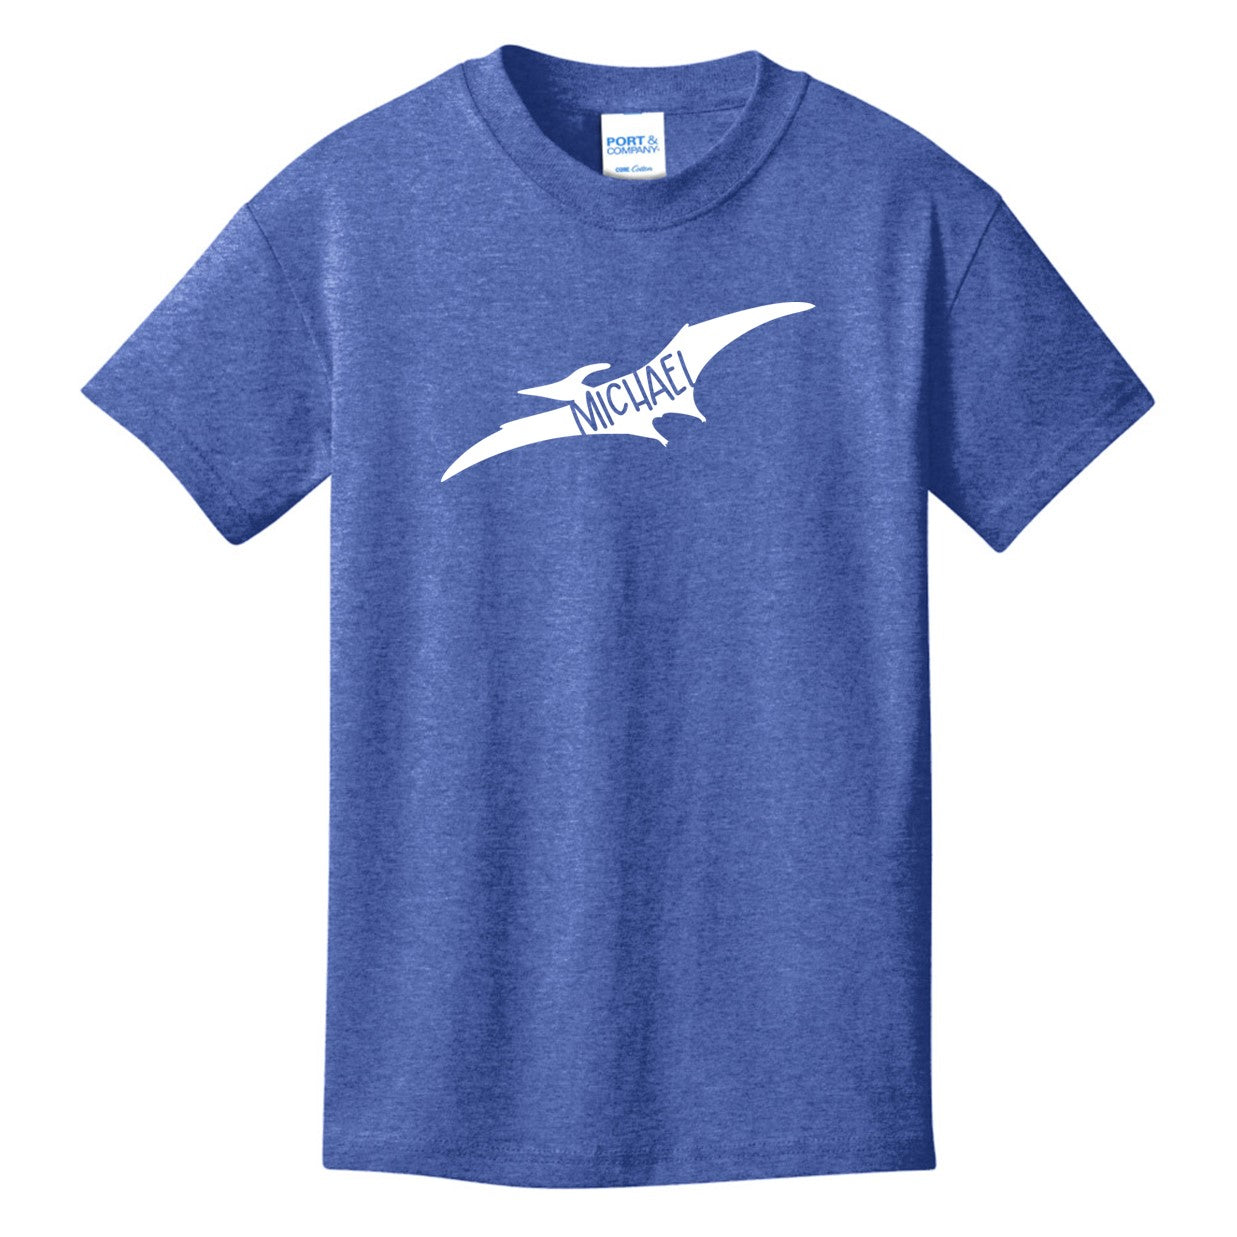 Dinosaur Youth Tee Personalized with your child's name!